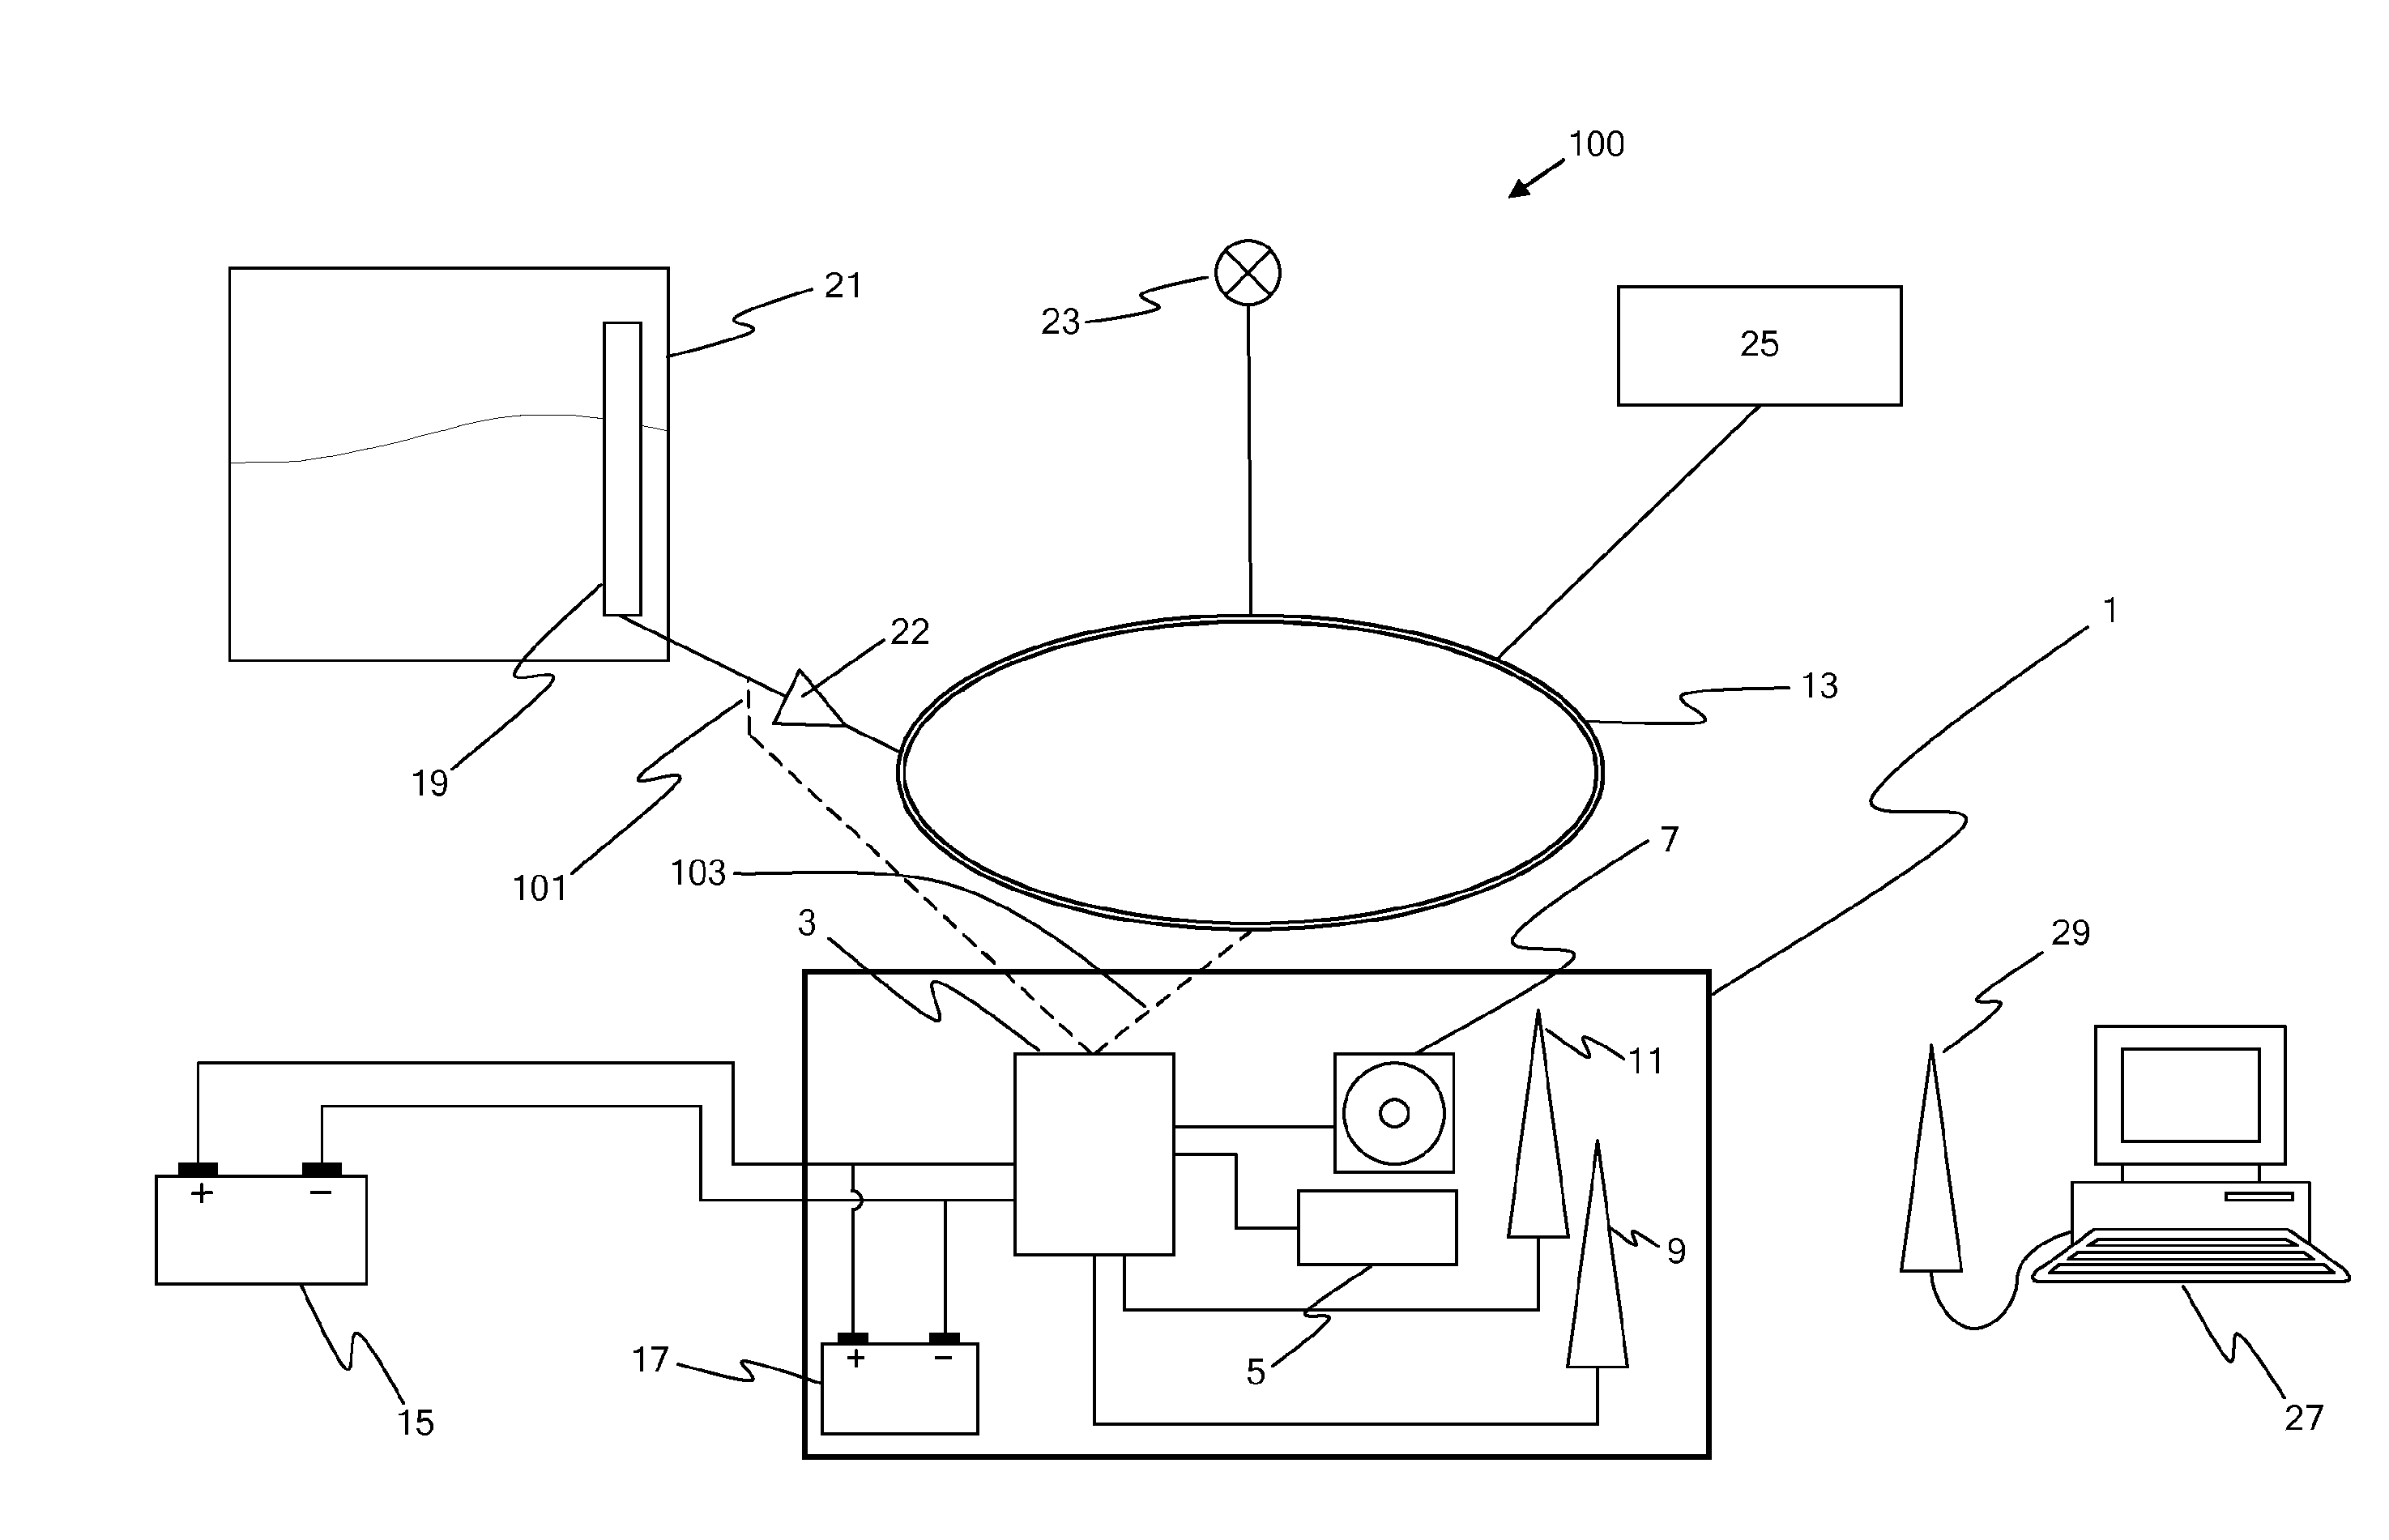 Fuel monitoring apparatus and methods